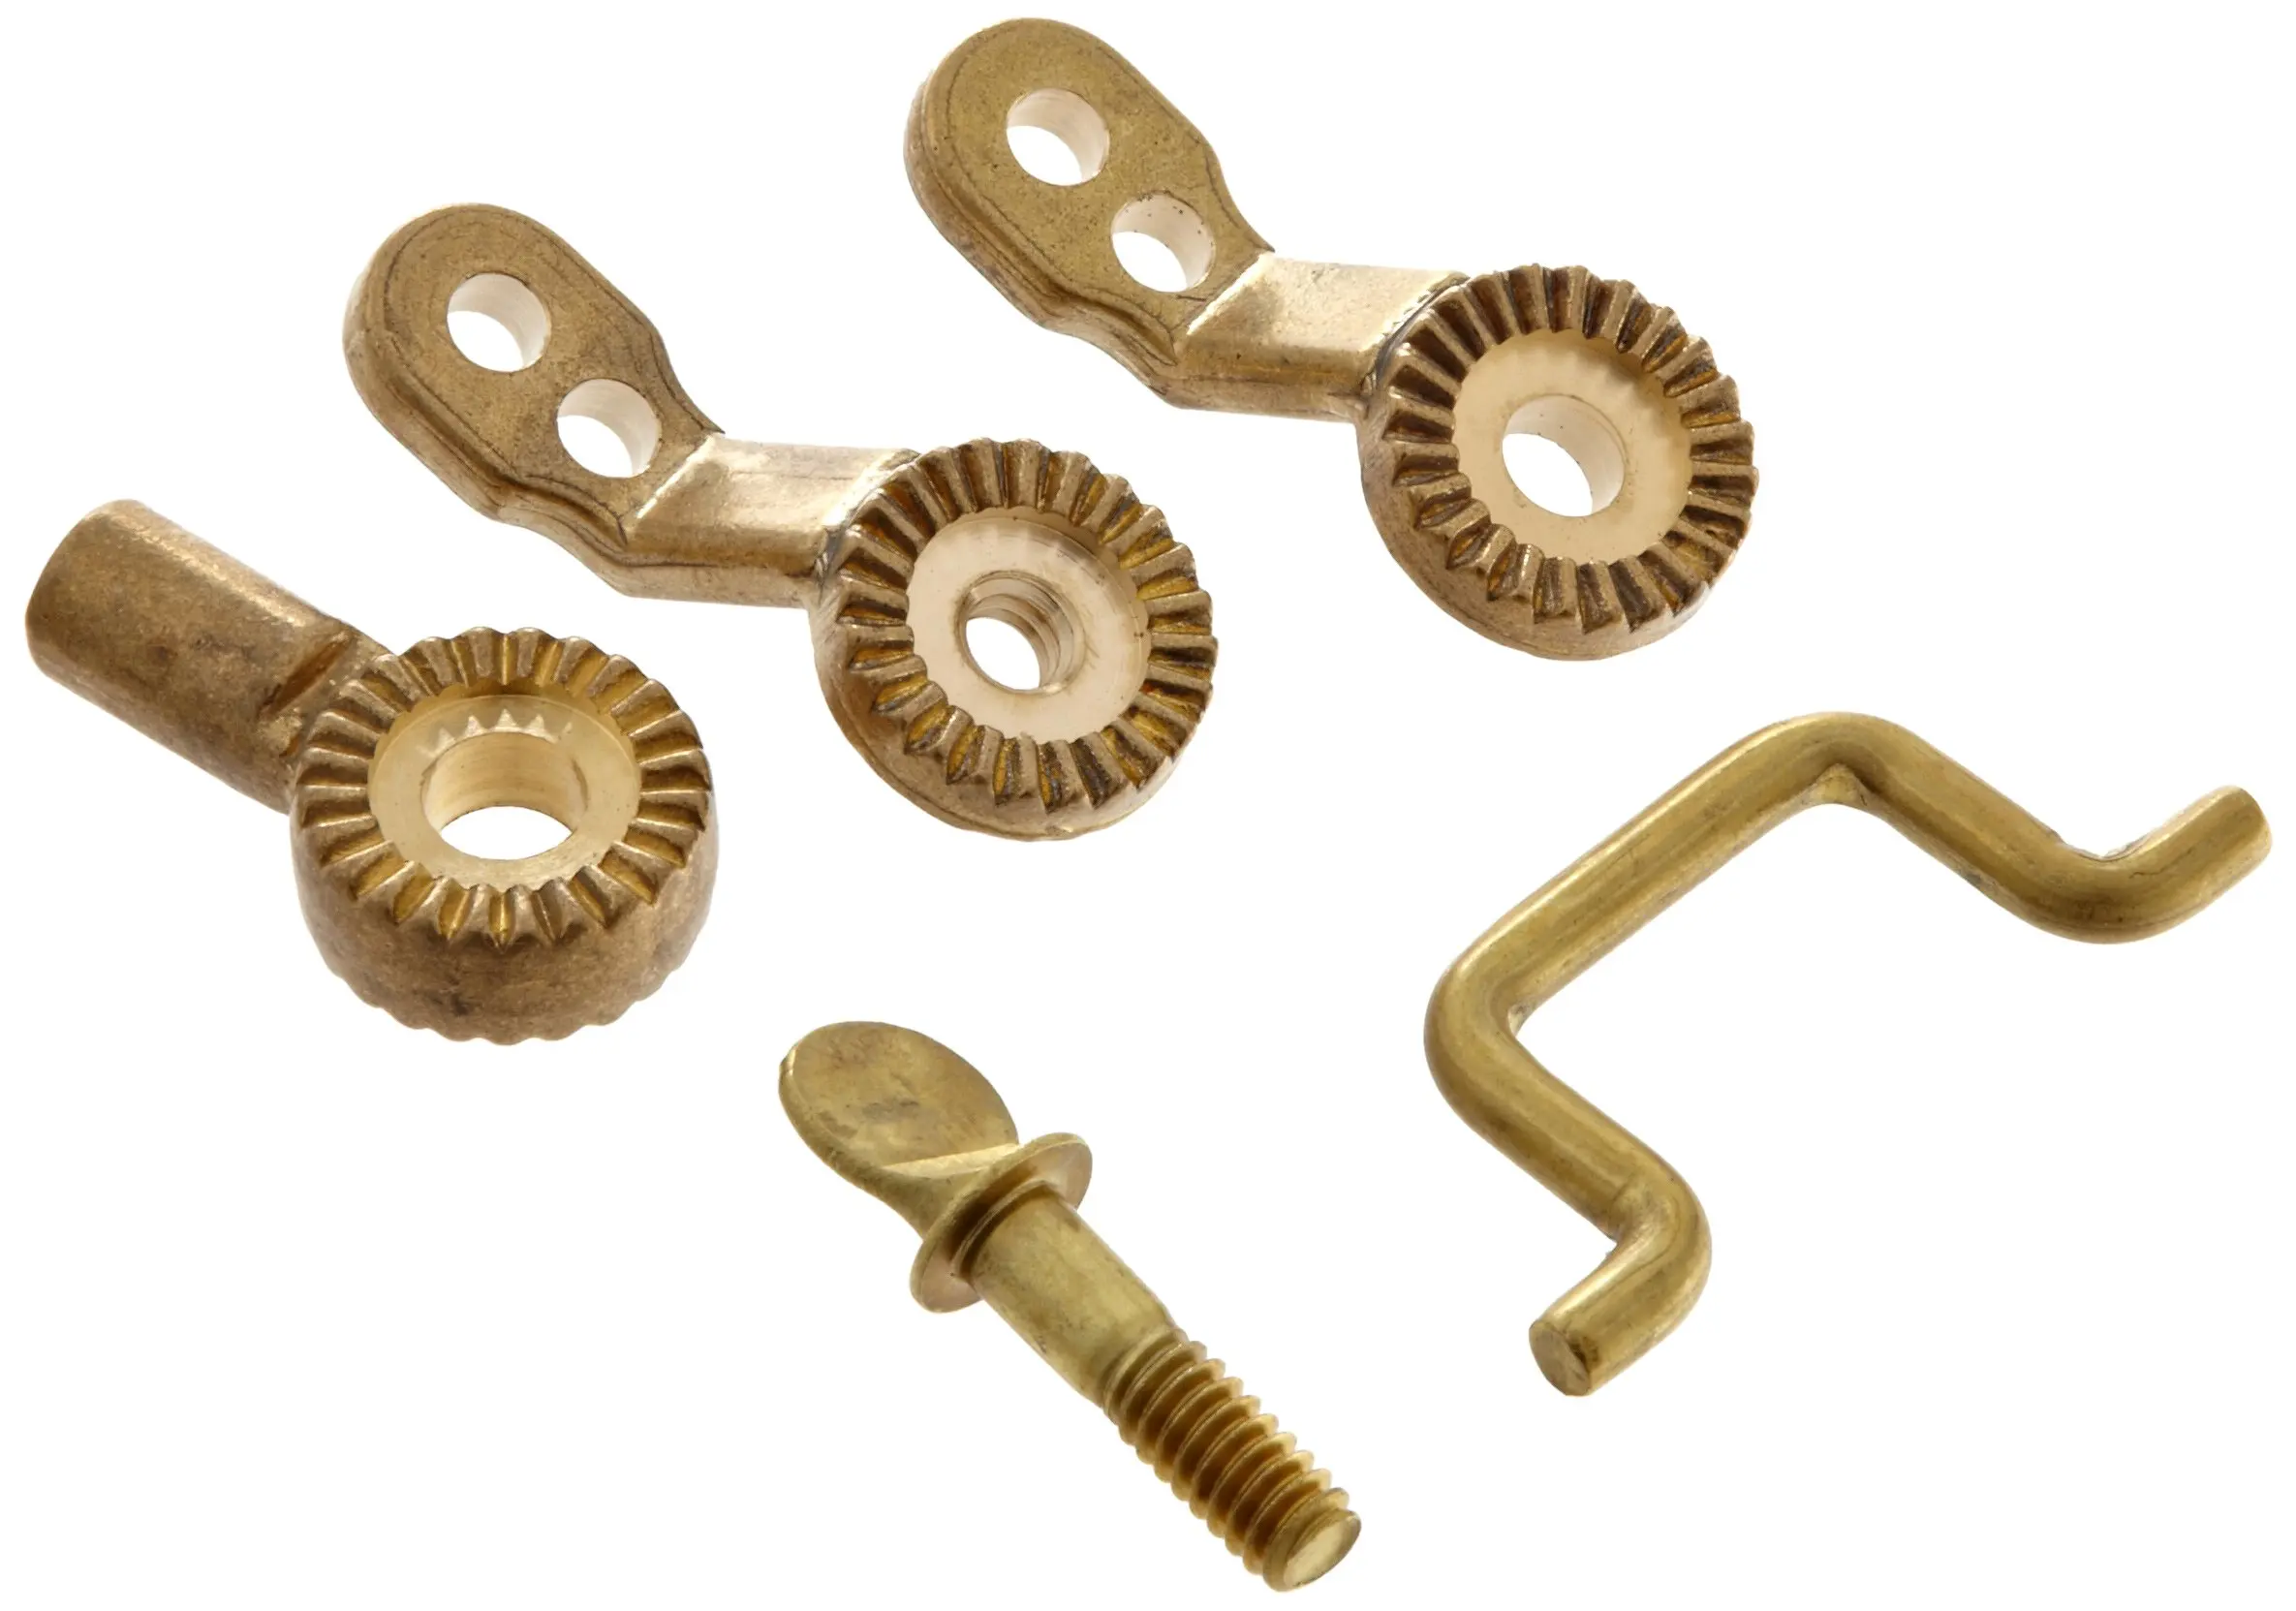 Robert Manufacturing KB149 Bob 3 Piece Standard Disc and Cup Kit for R605T Brass Float Valves